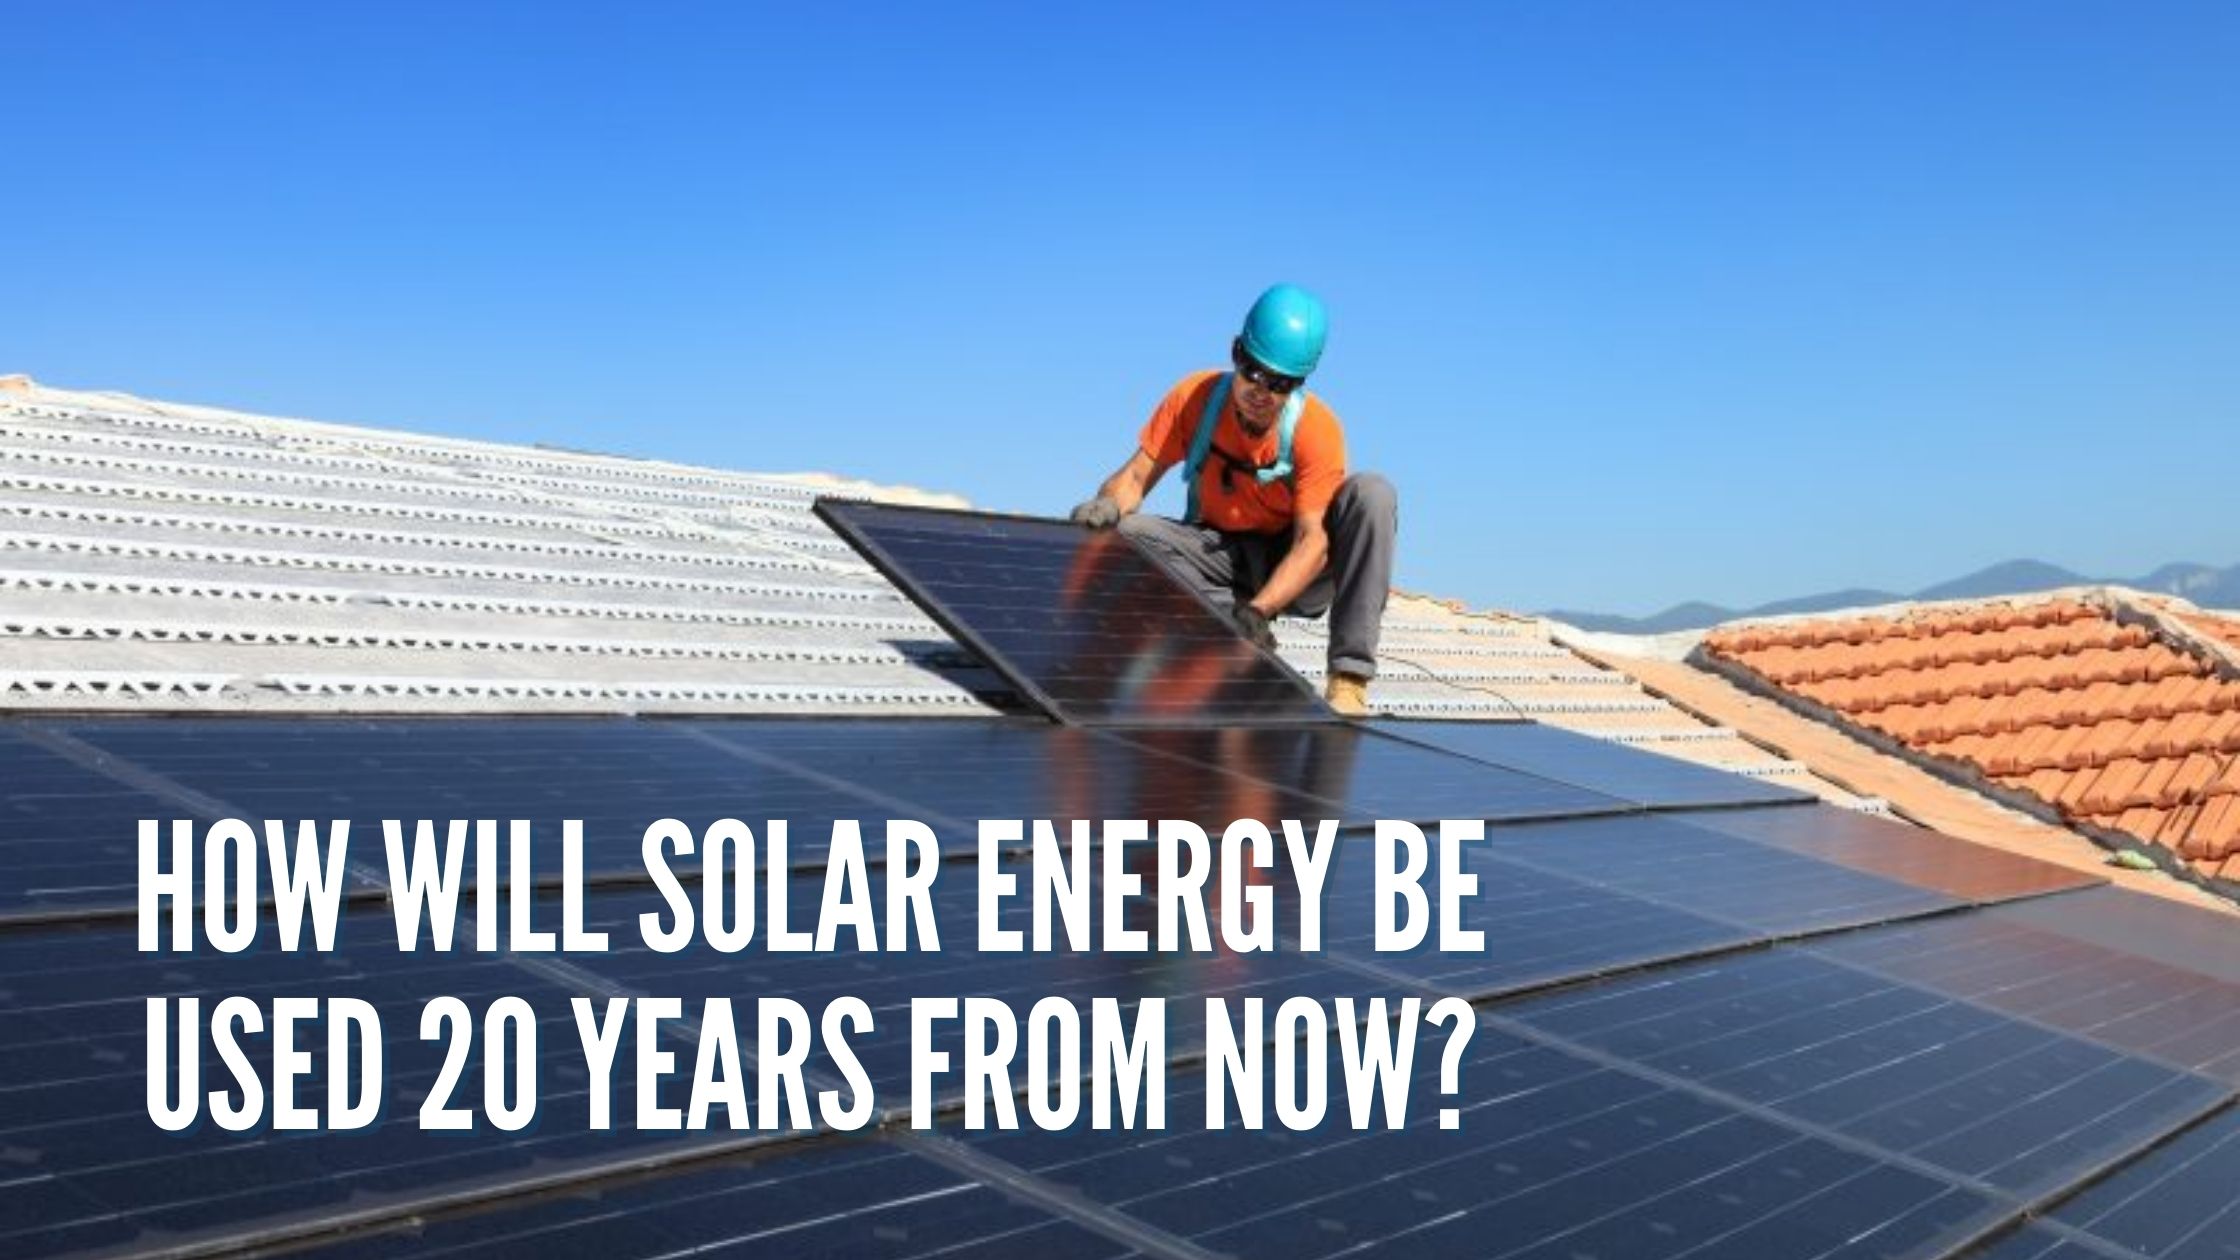 How will solar energy be used 20 years from now